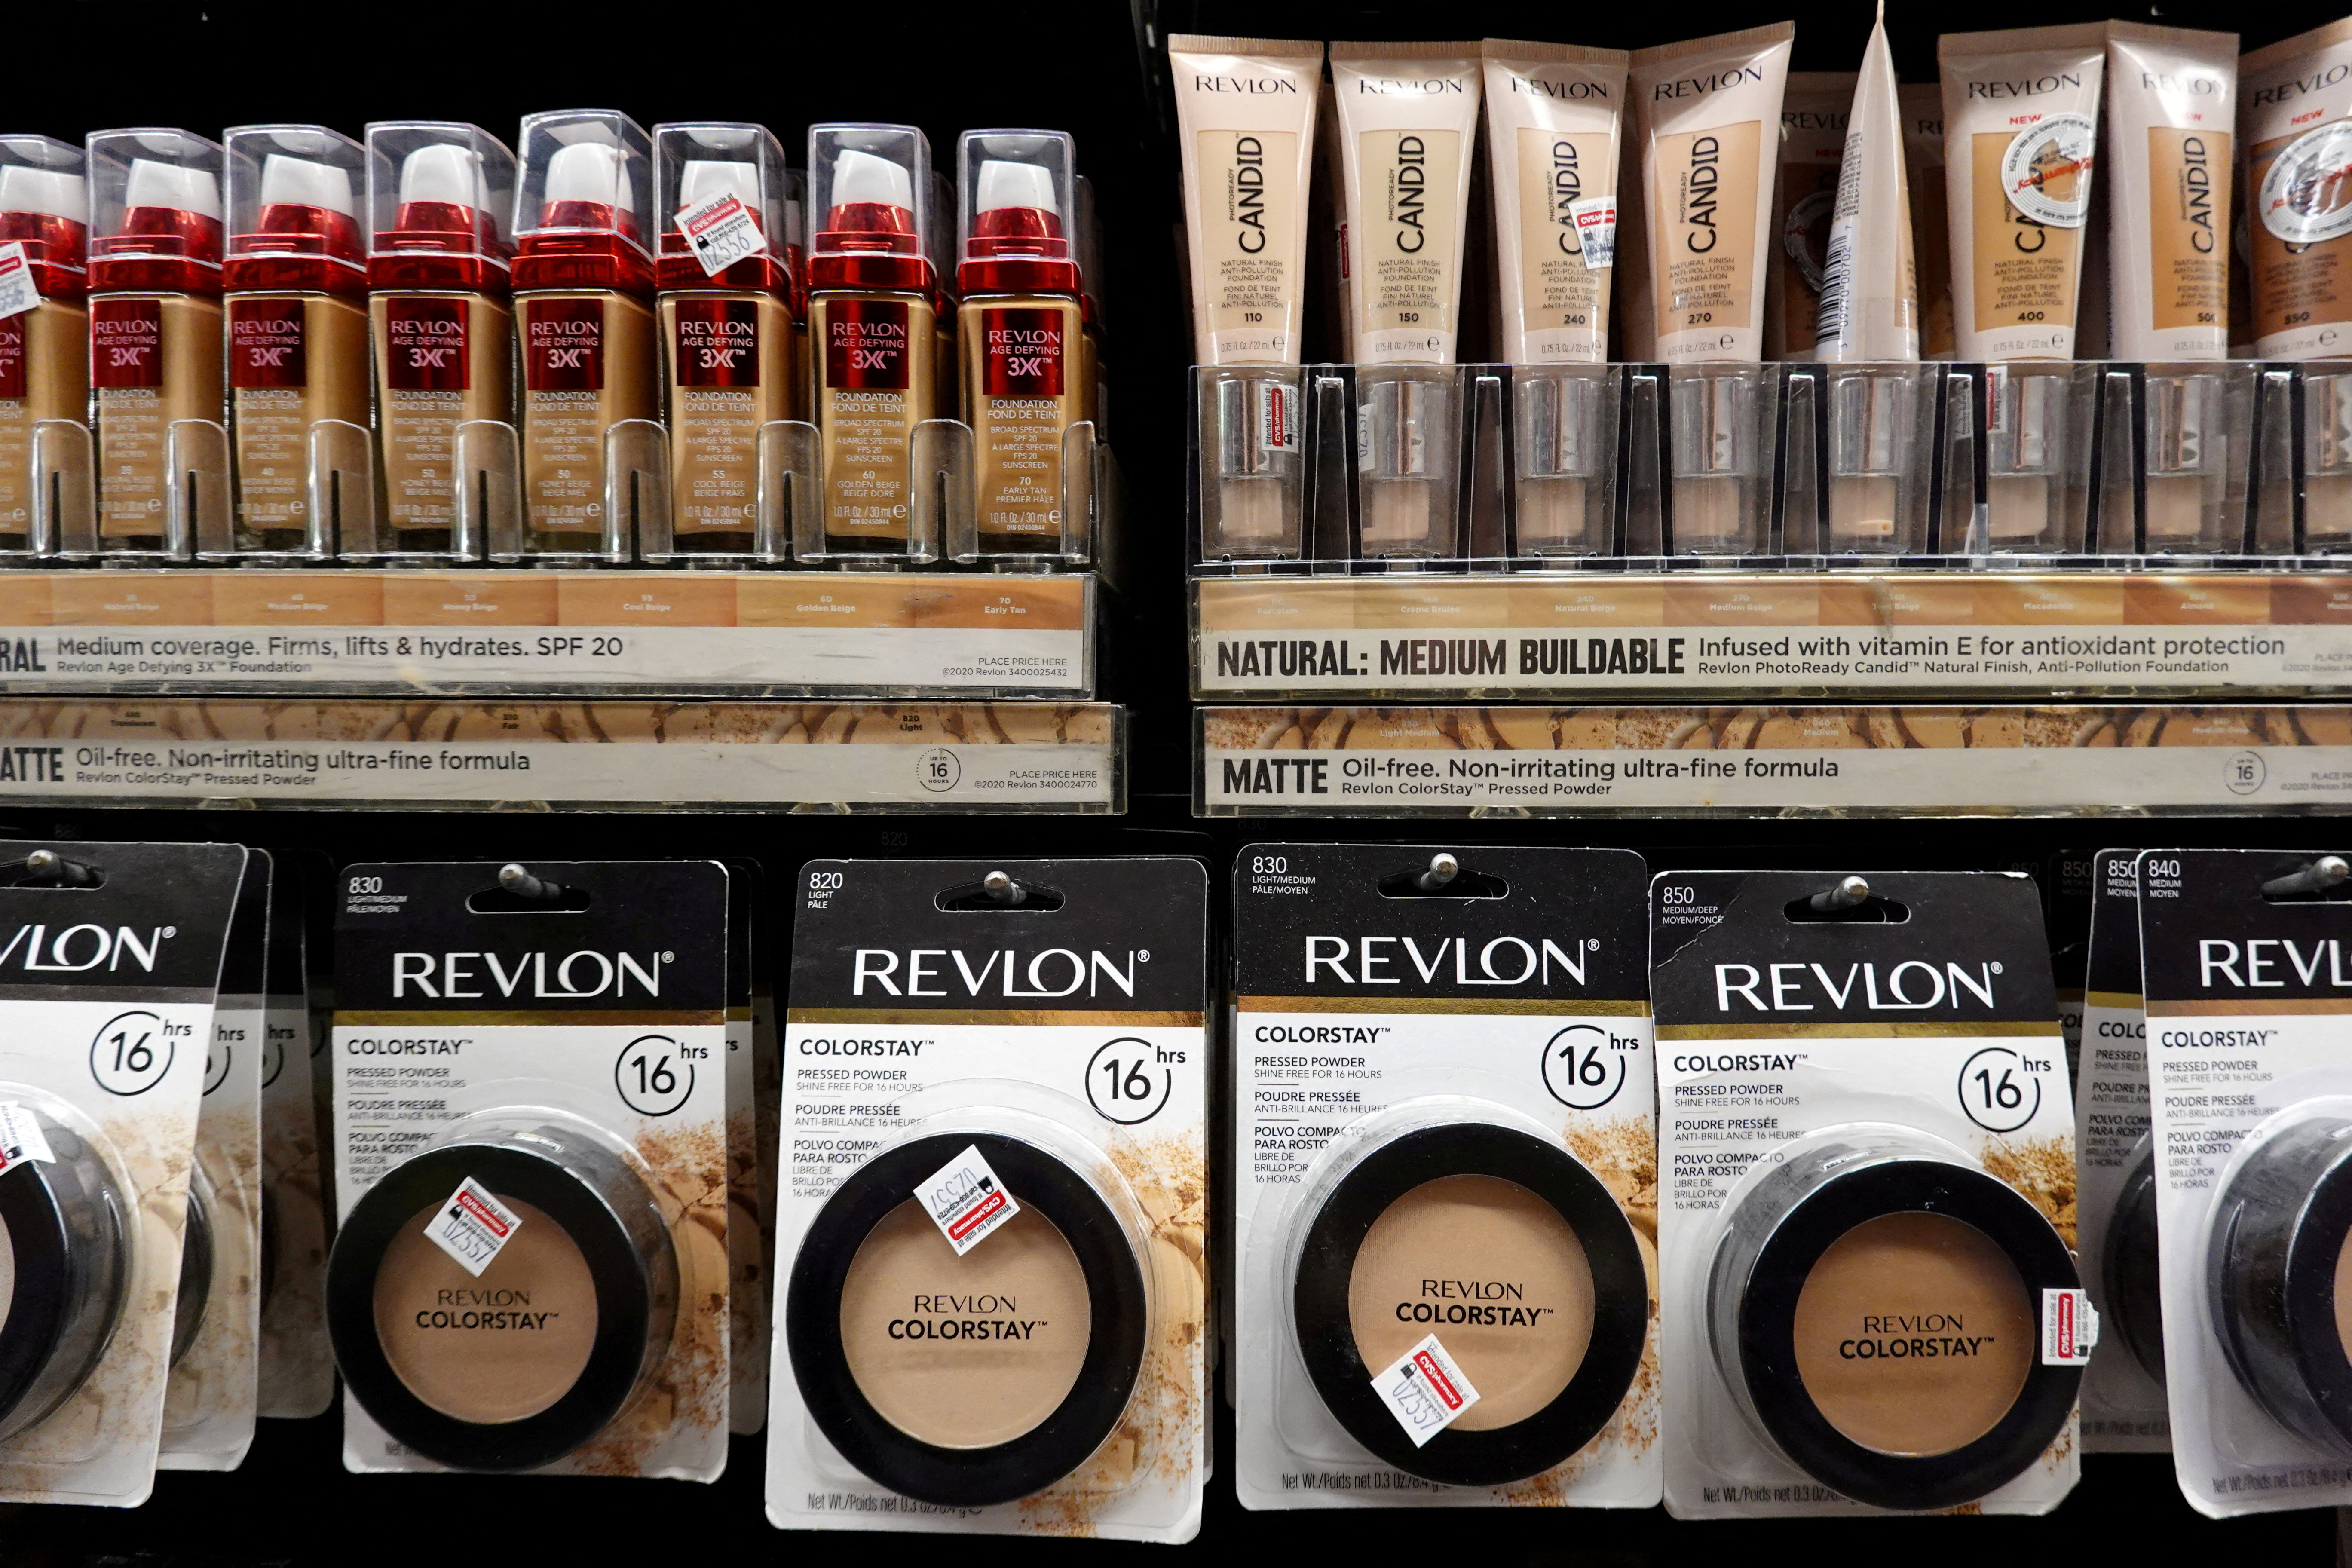 Revlon products are seen for sale in a store in Manhattan, New York City